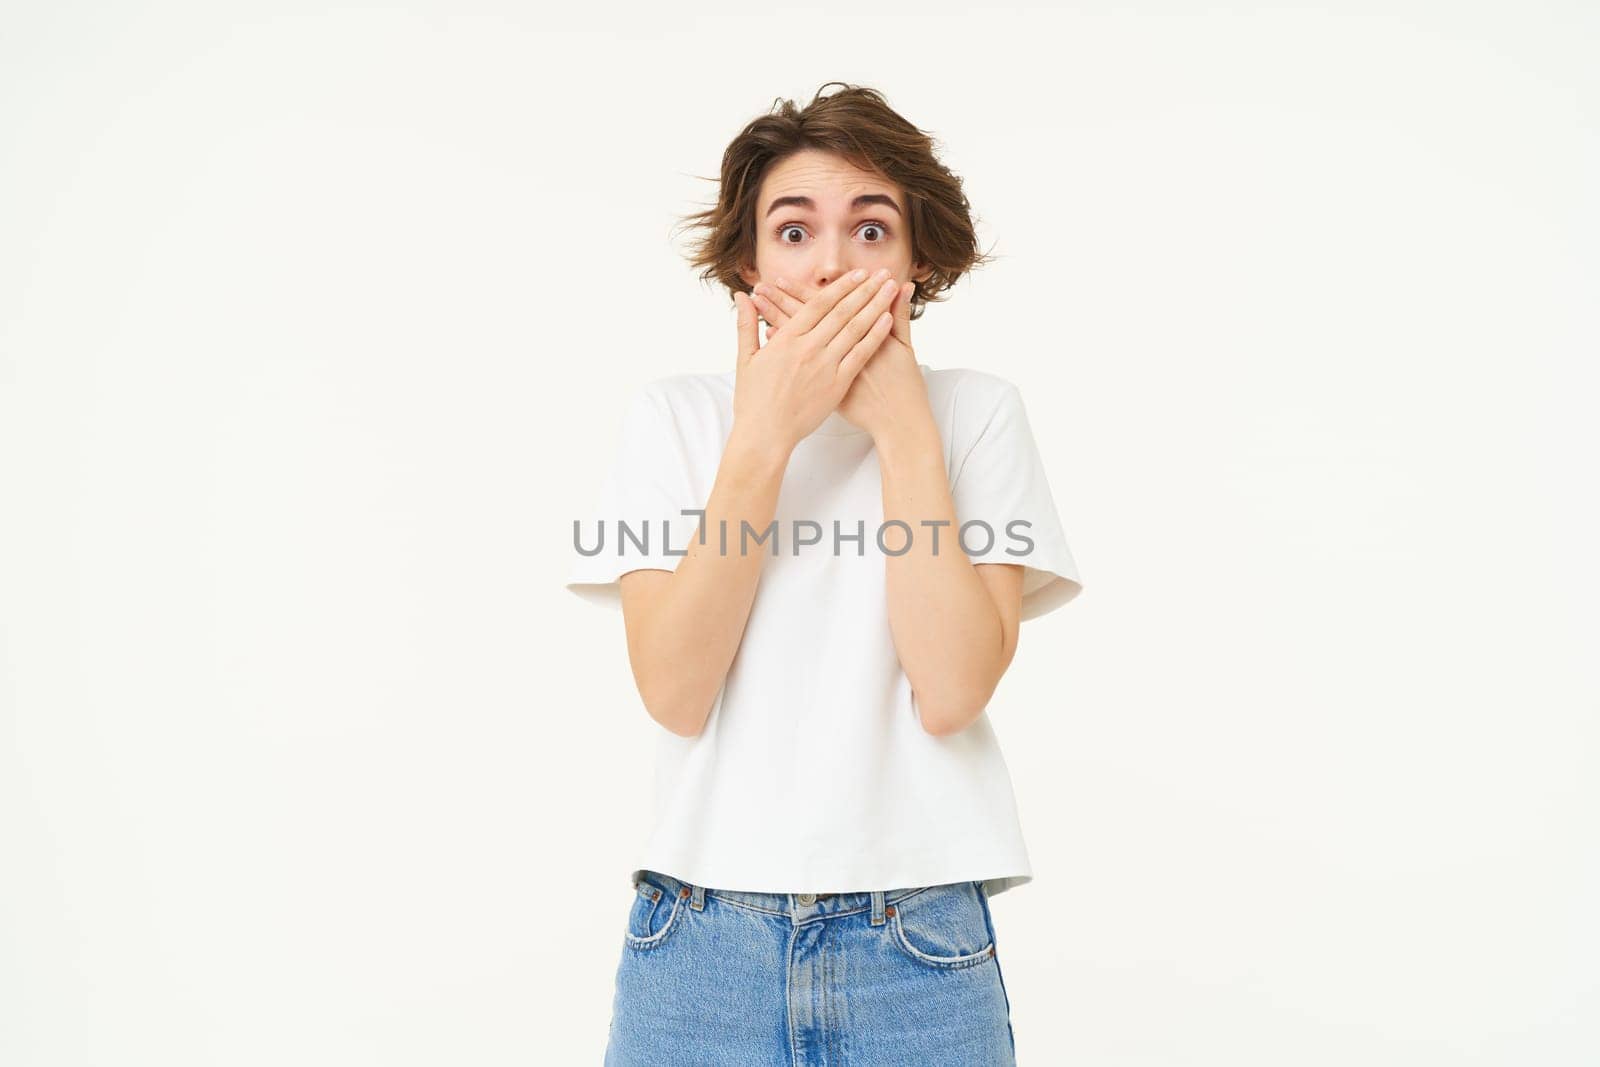 Portrait of woman with surprised face, covers her mouth and gasps shocked, stands isolated over white background.